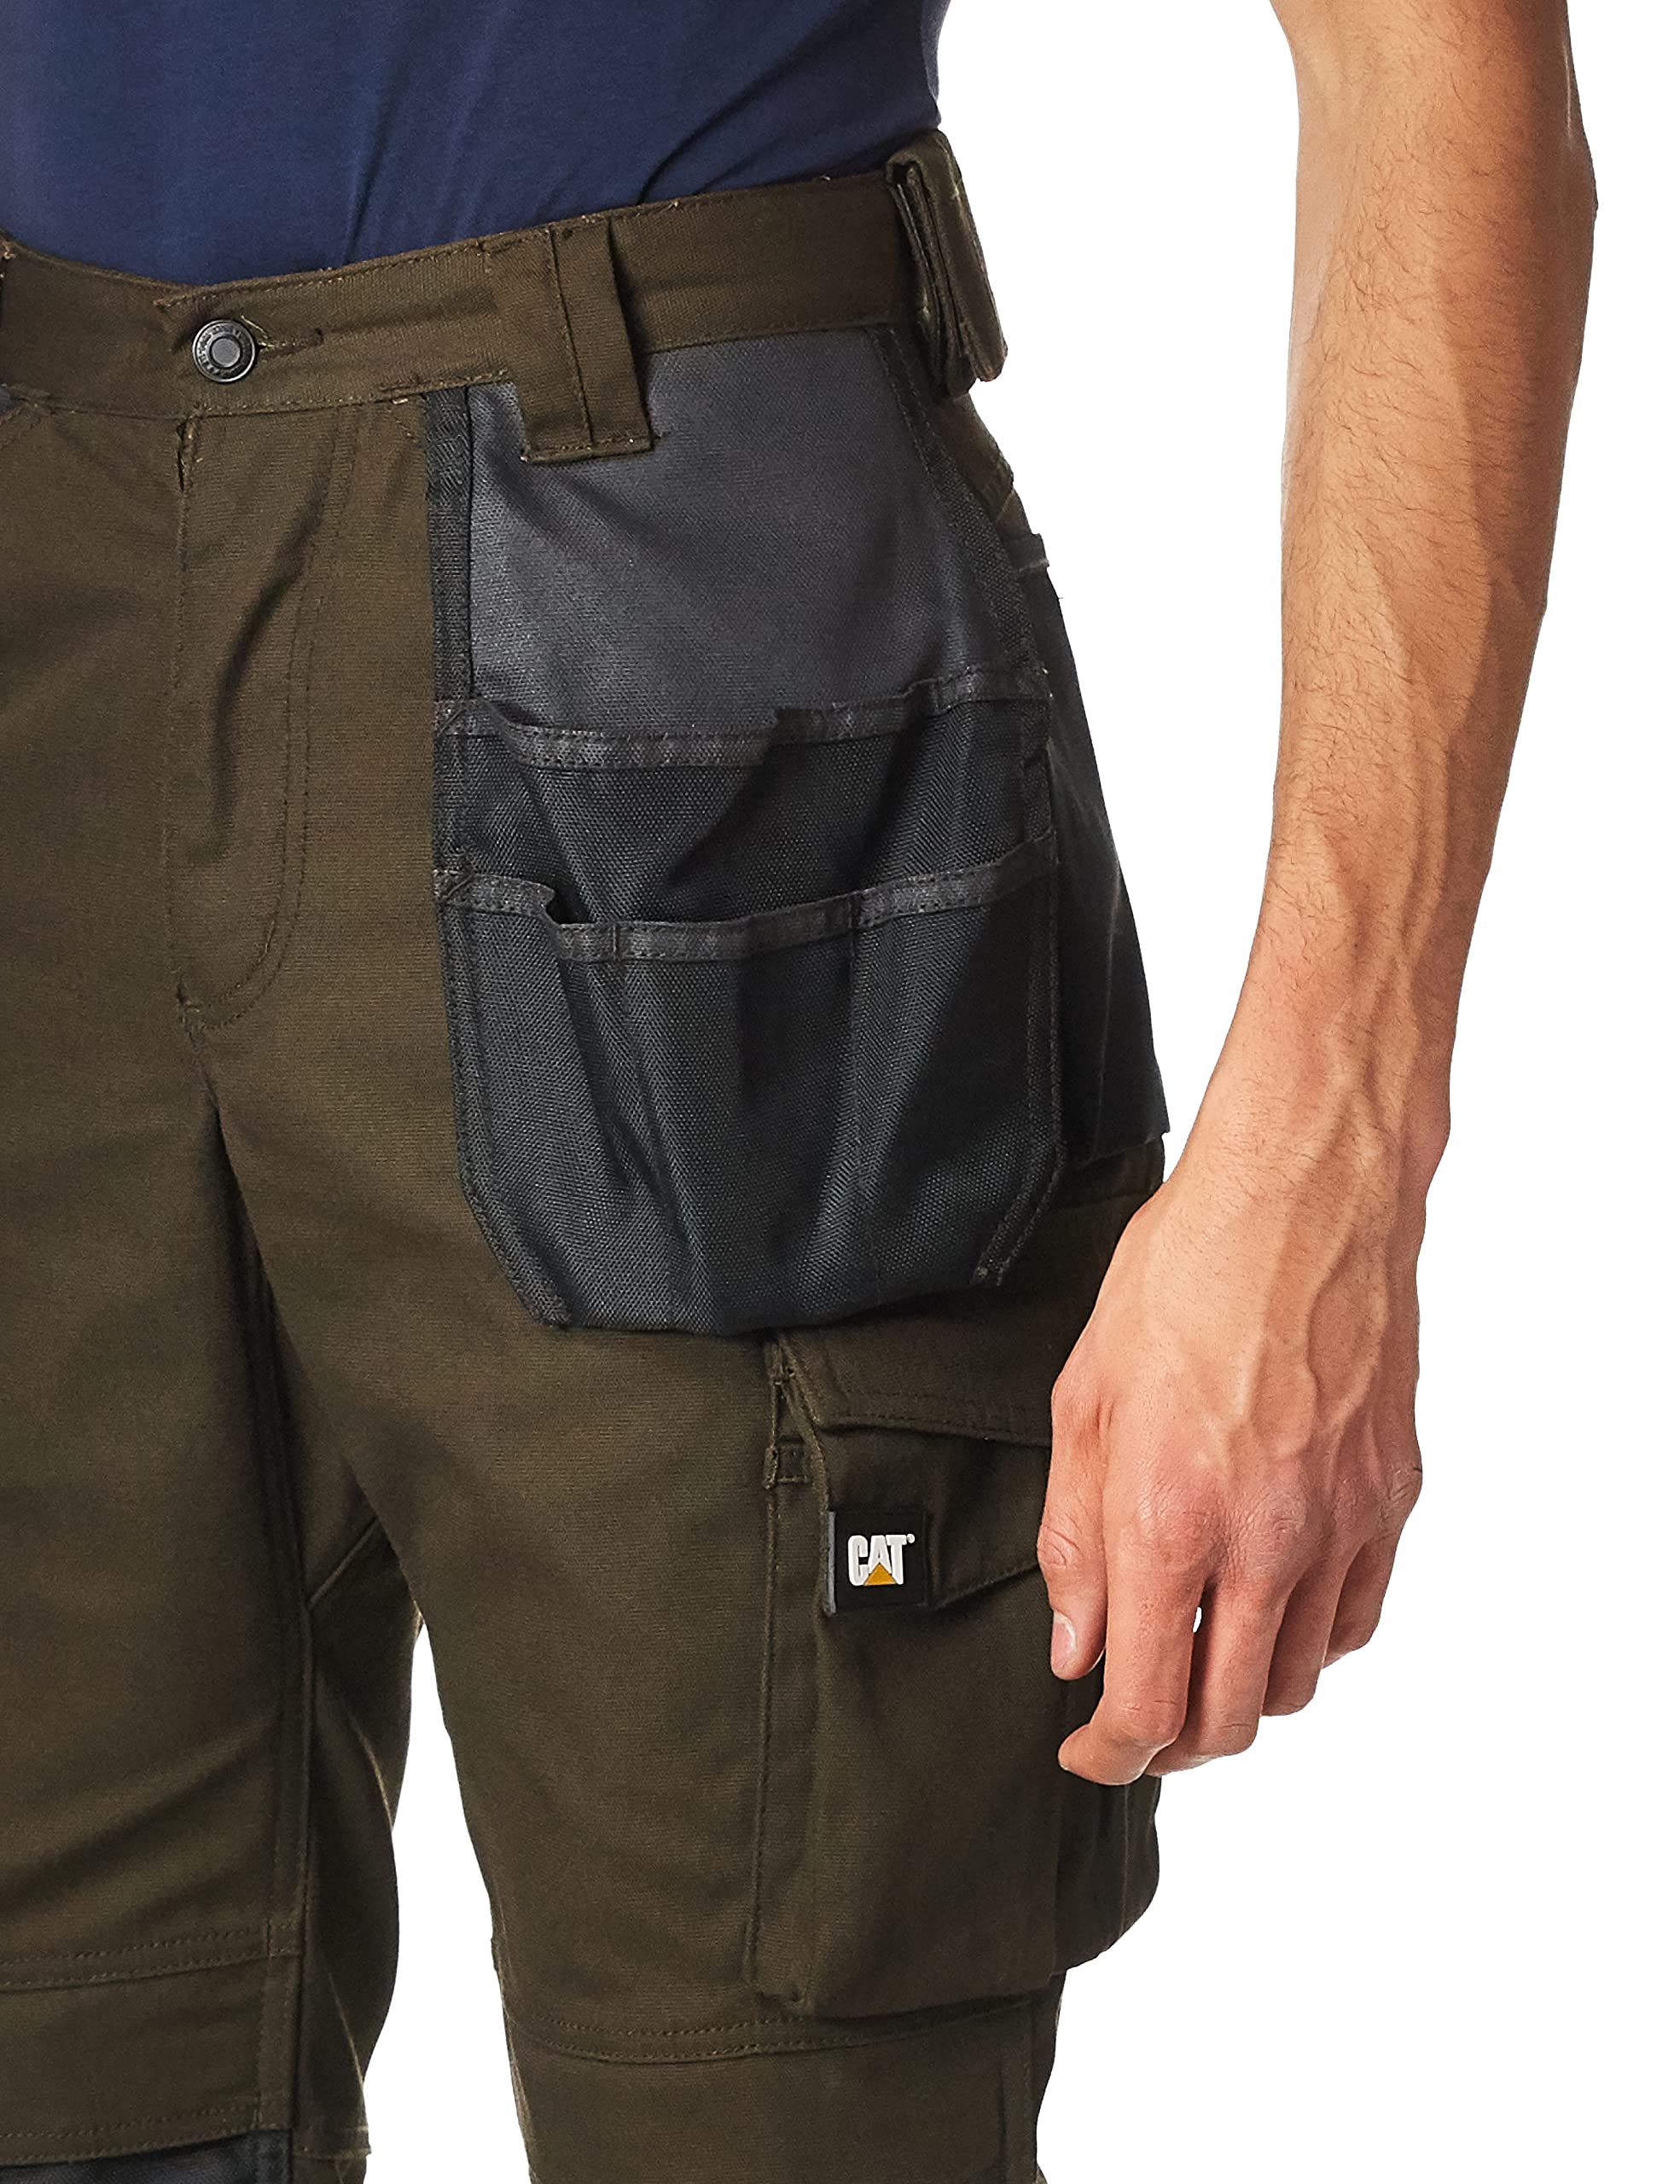 Caterpillar Trademark Work Pants for Men Built from Tough Canvas Fabric with Cargo Space and Ease of Movement, Classic Fit